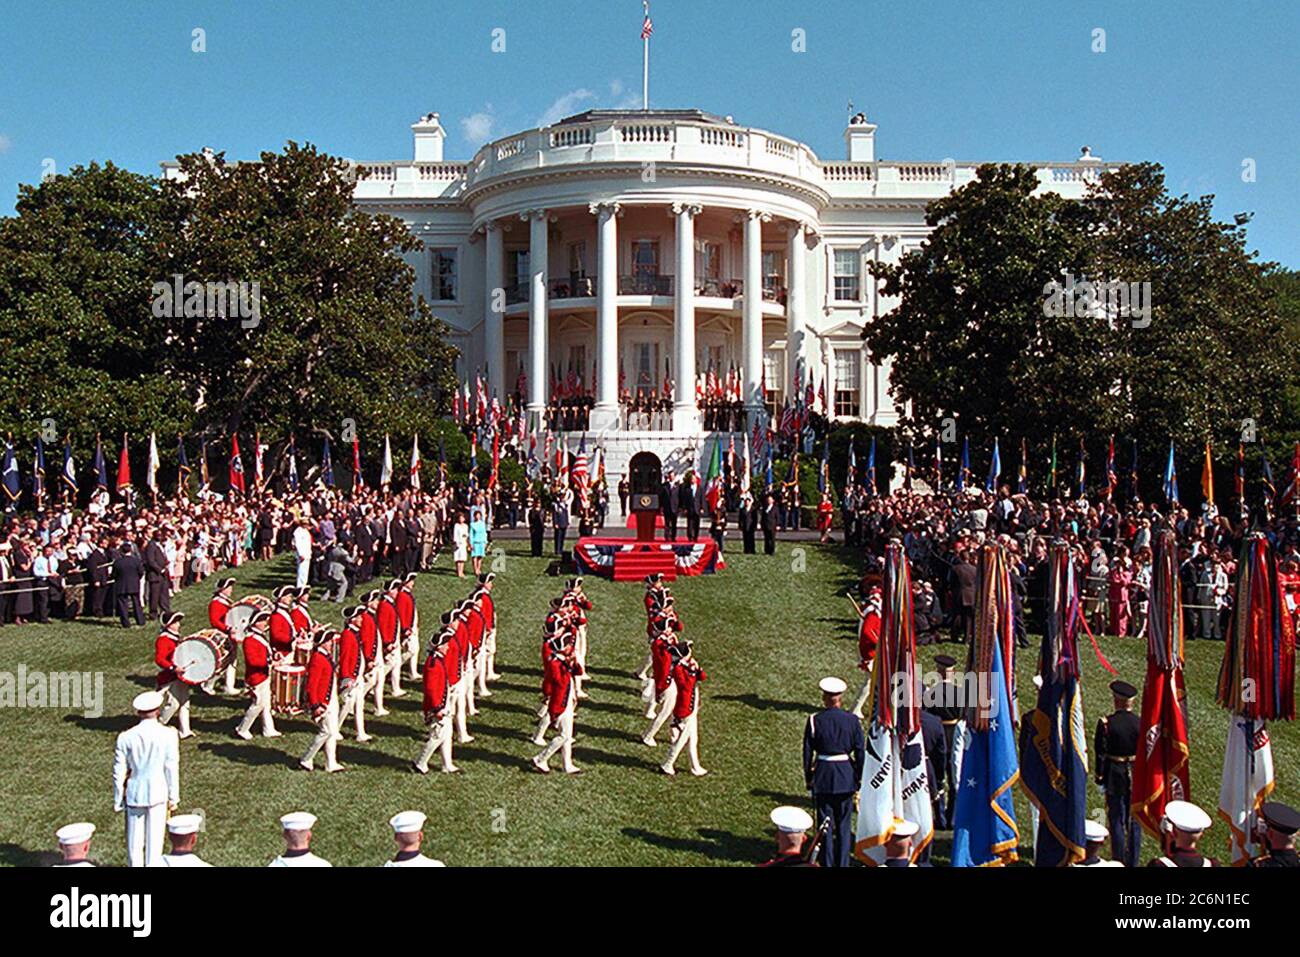 President George W. Bush and Mexico President Vicente Fox participate in the Musical Troop in Review (Army Fife and Drum Corps) during the State Arrival ceremony Wednesday, Sept. 5, 2001, on the South Lawn of the White House. Stock Photo